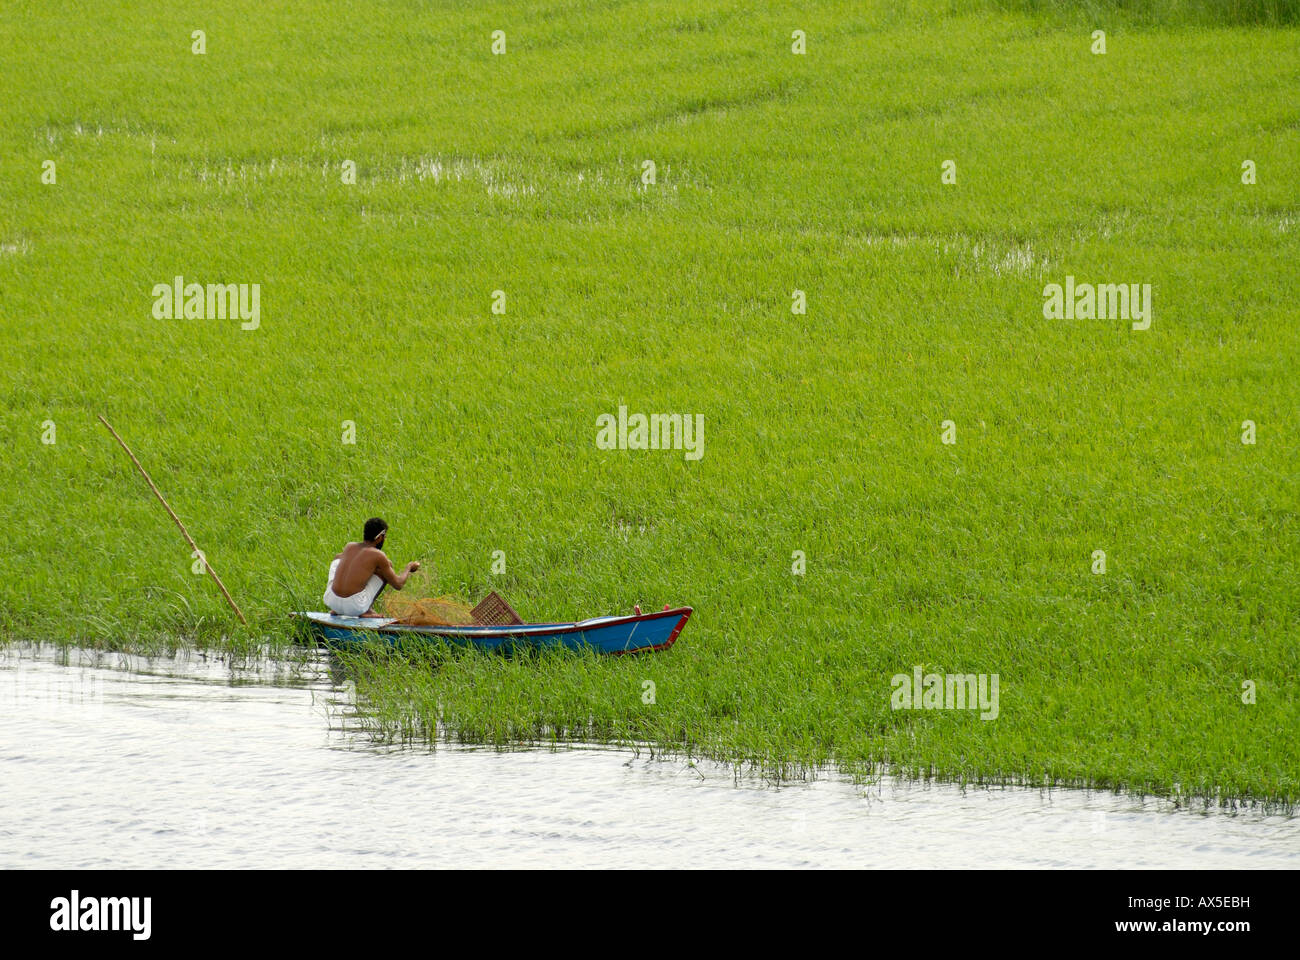 Fisherman on the Nile, sea grass, Egypt, North Africa Stock Photo